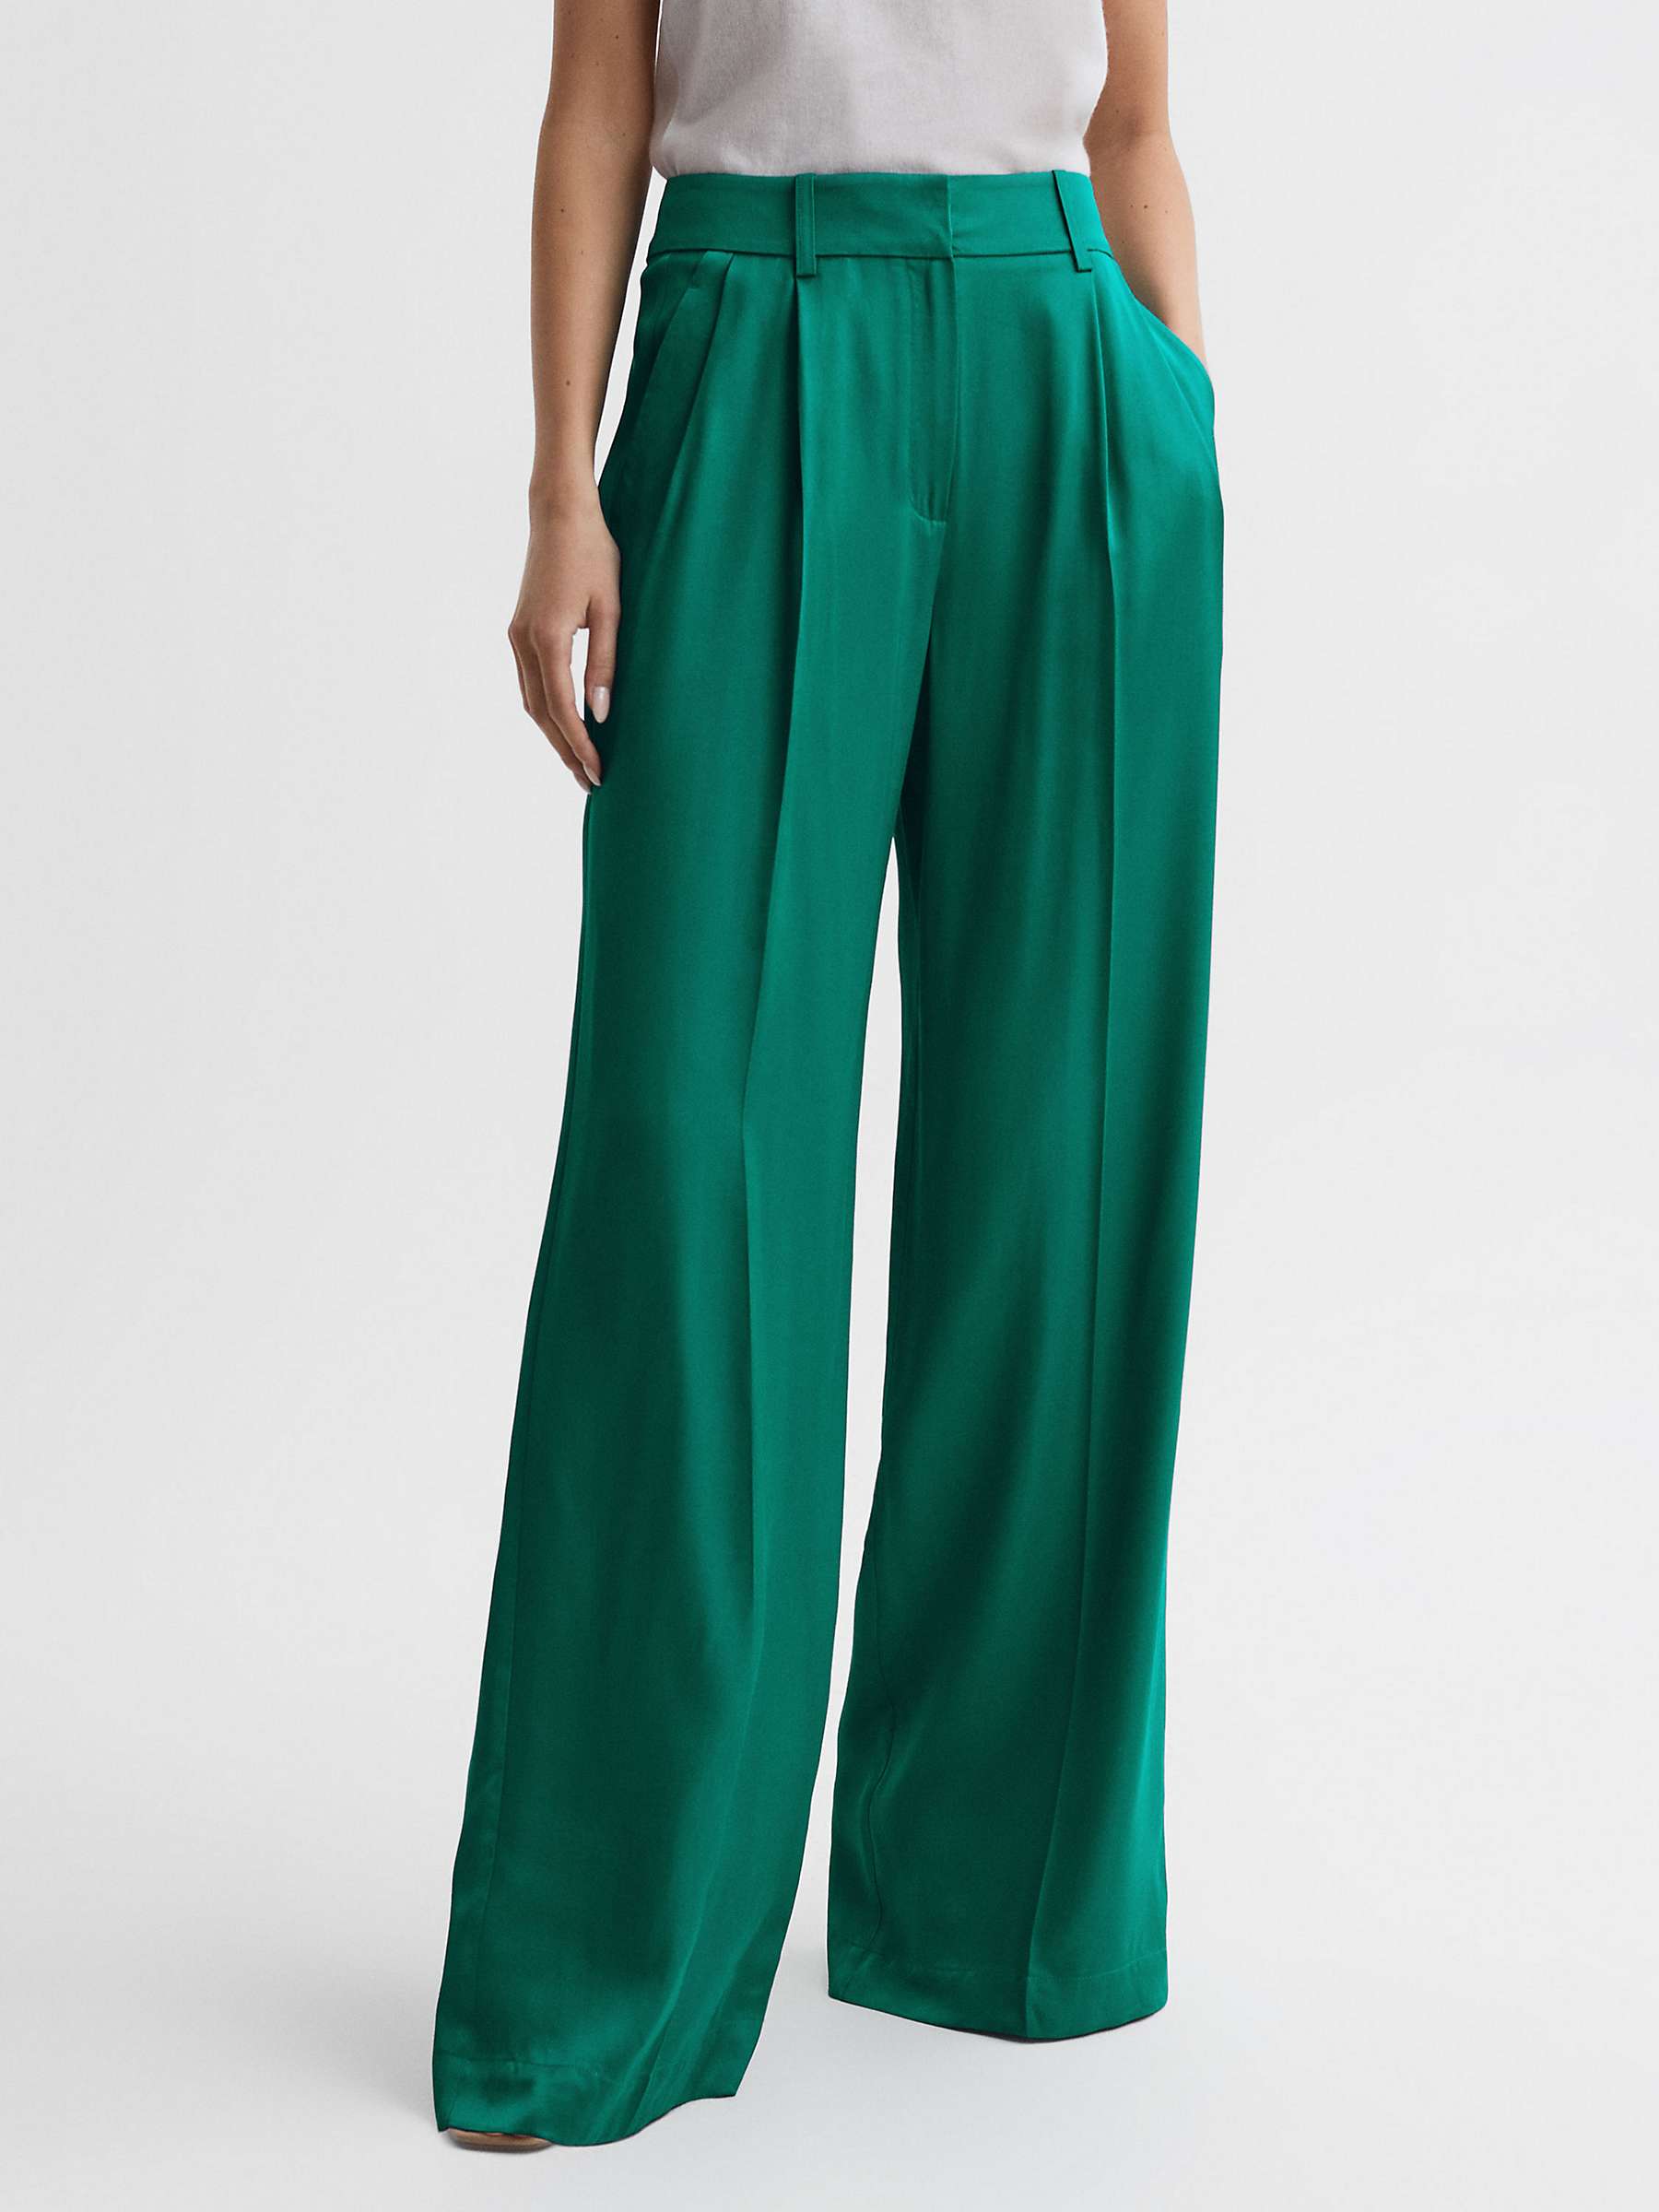 Reiss Rina Pleat Front Wide Leg Trousers, Green at John Lewis & Partners